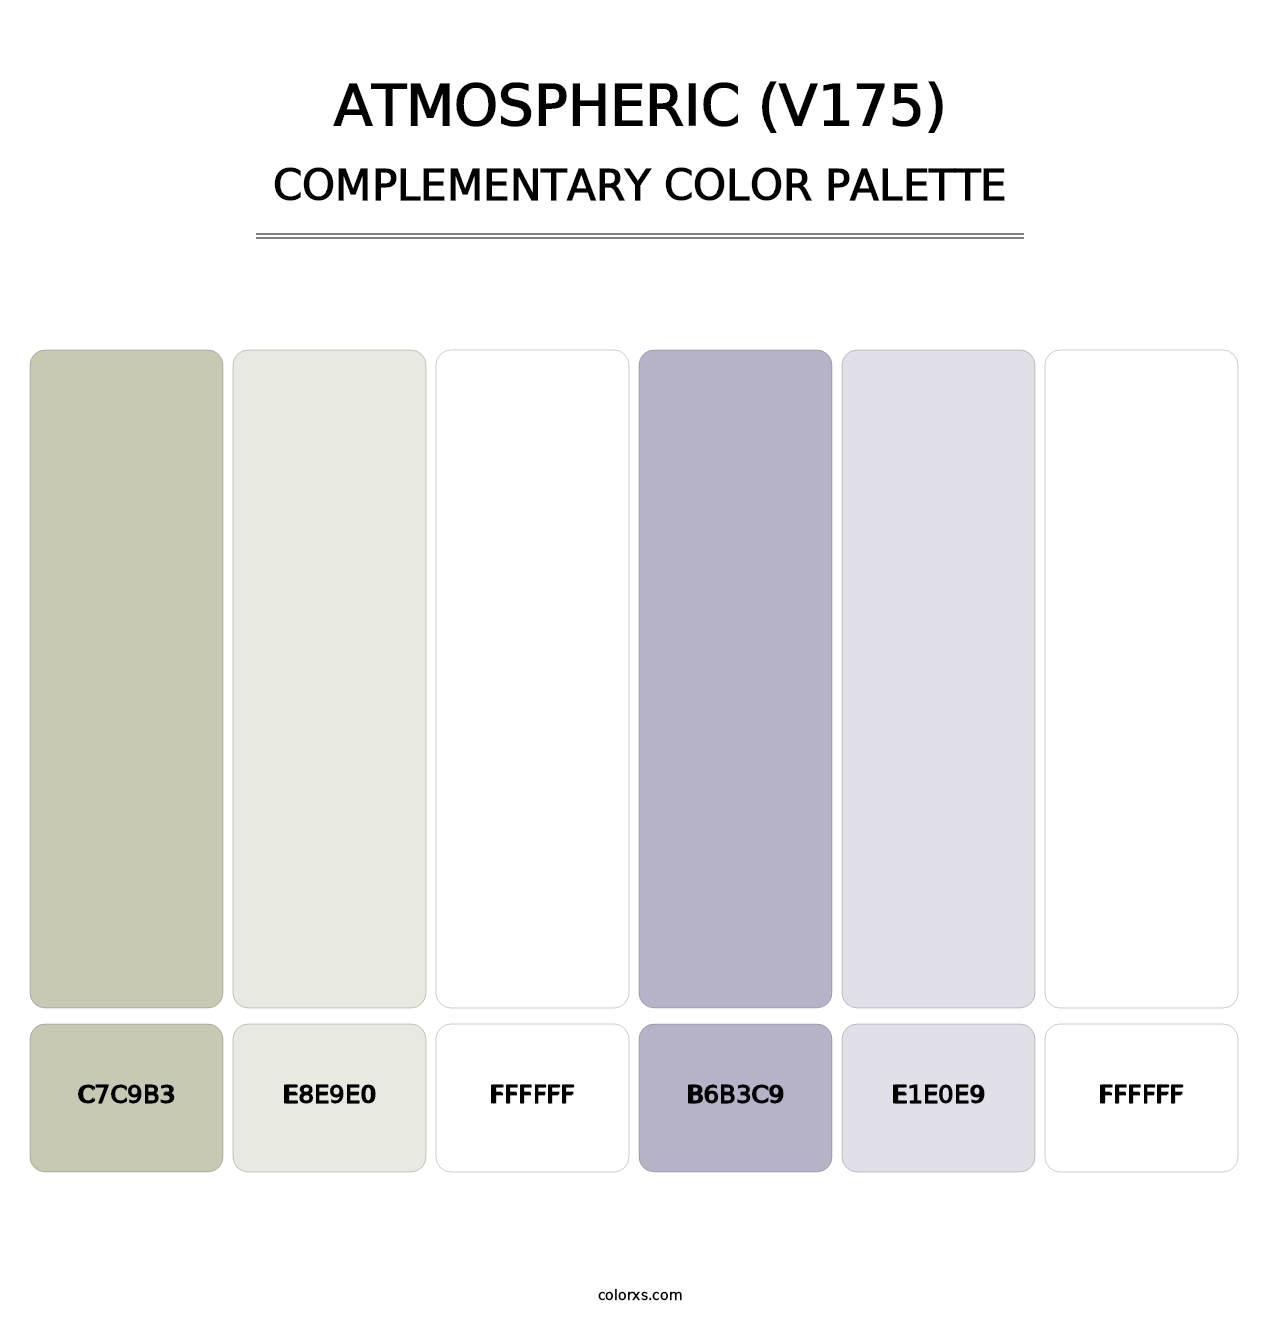 Atmospheric (V175) - Complementary Color Palette